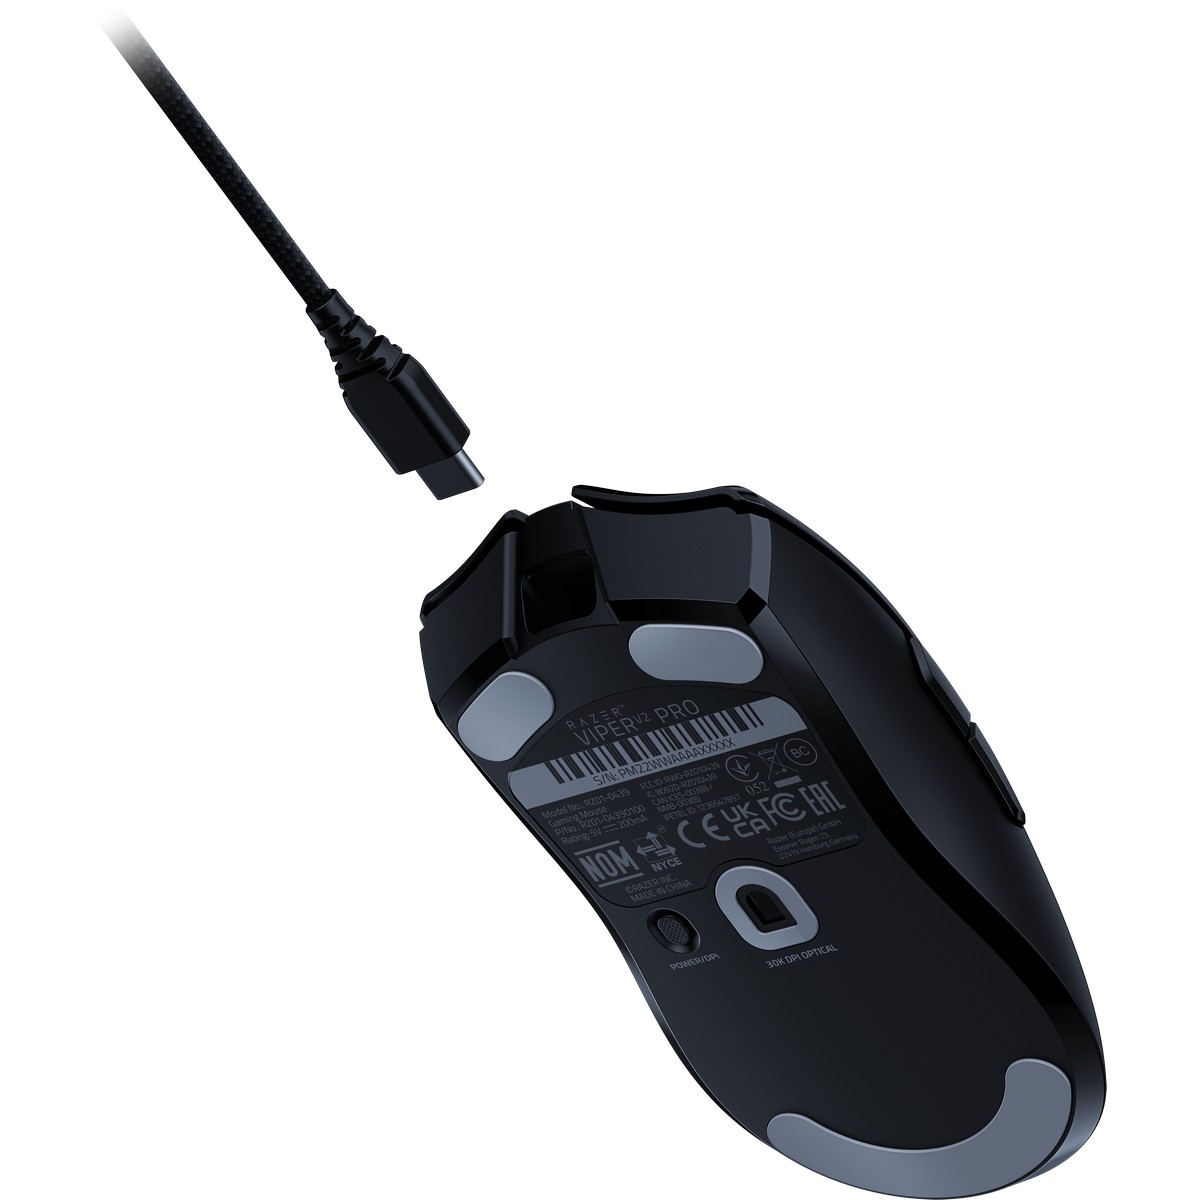 Razer Viper V2 Pro Lightweight Wireless Optical Gaming Mouse with